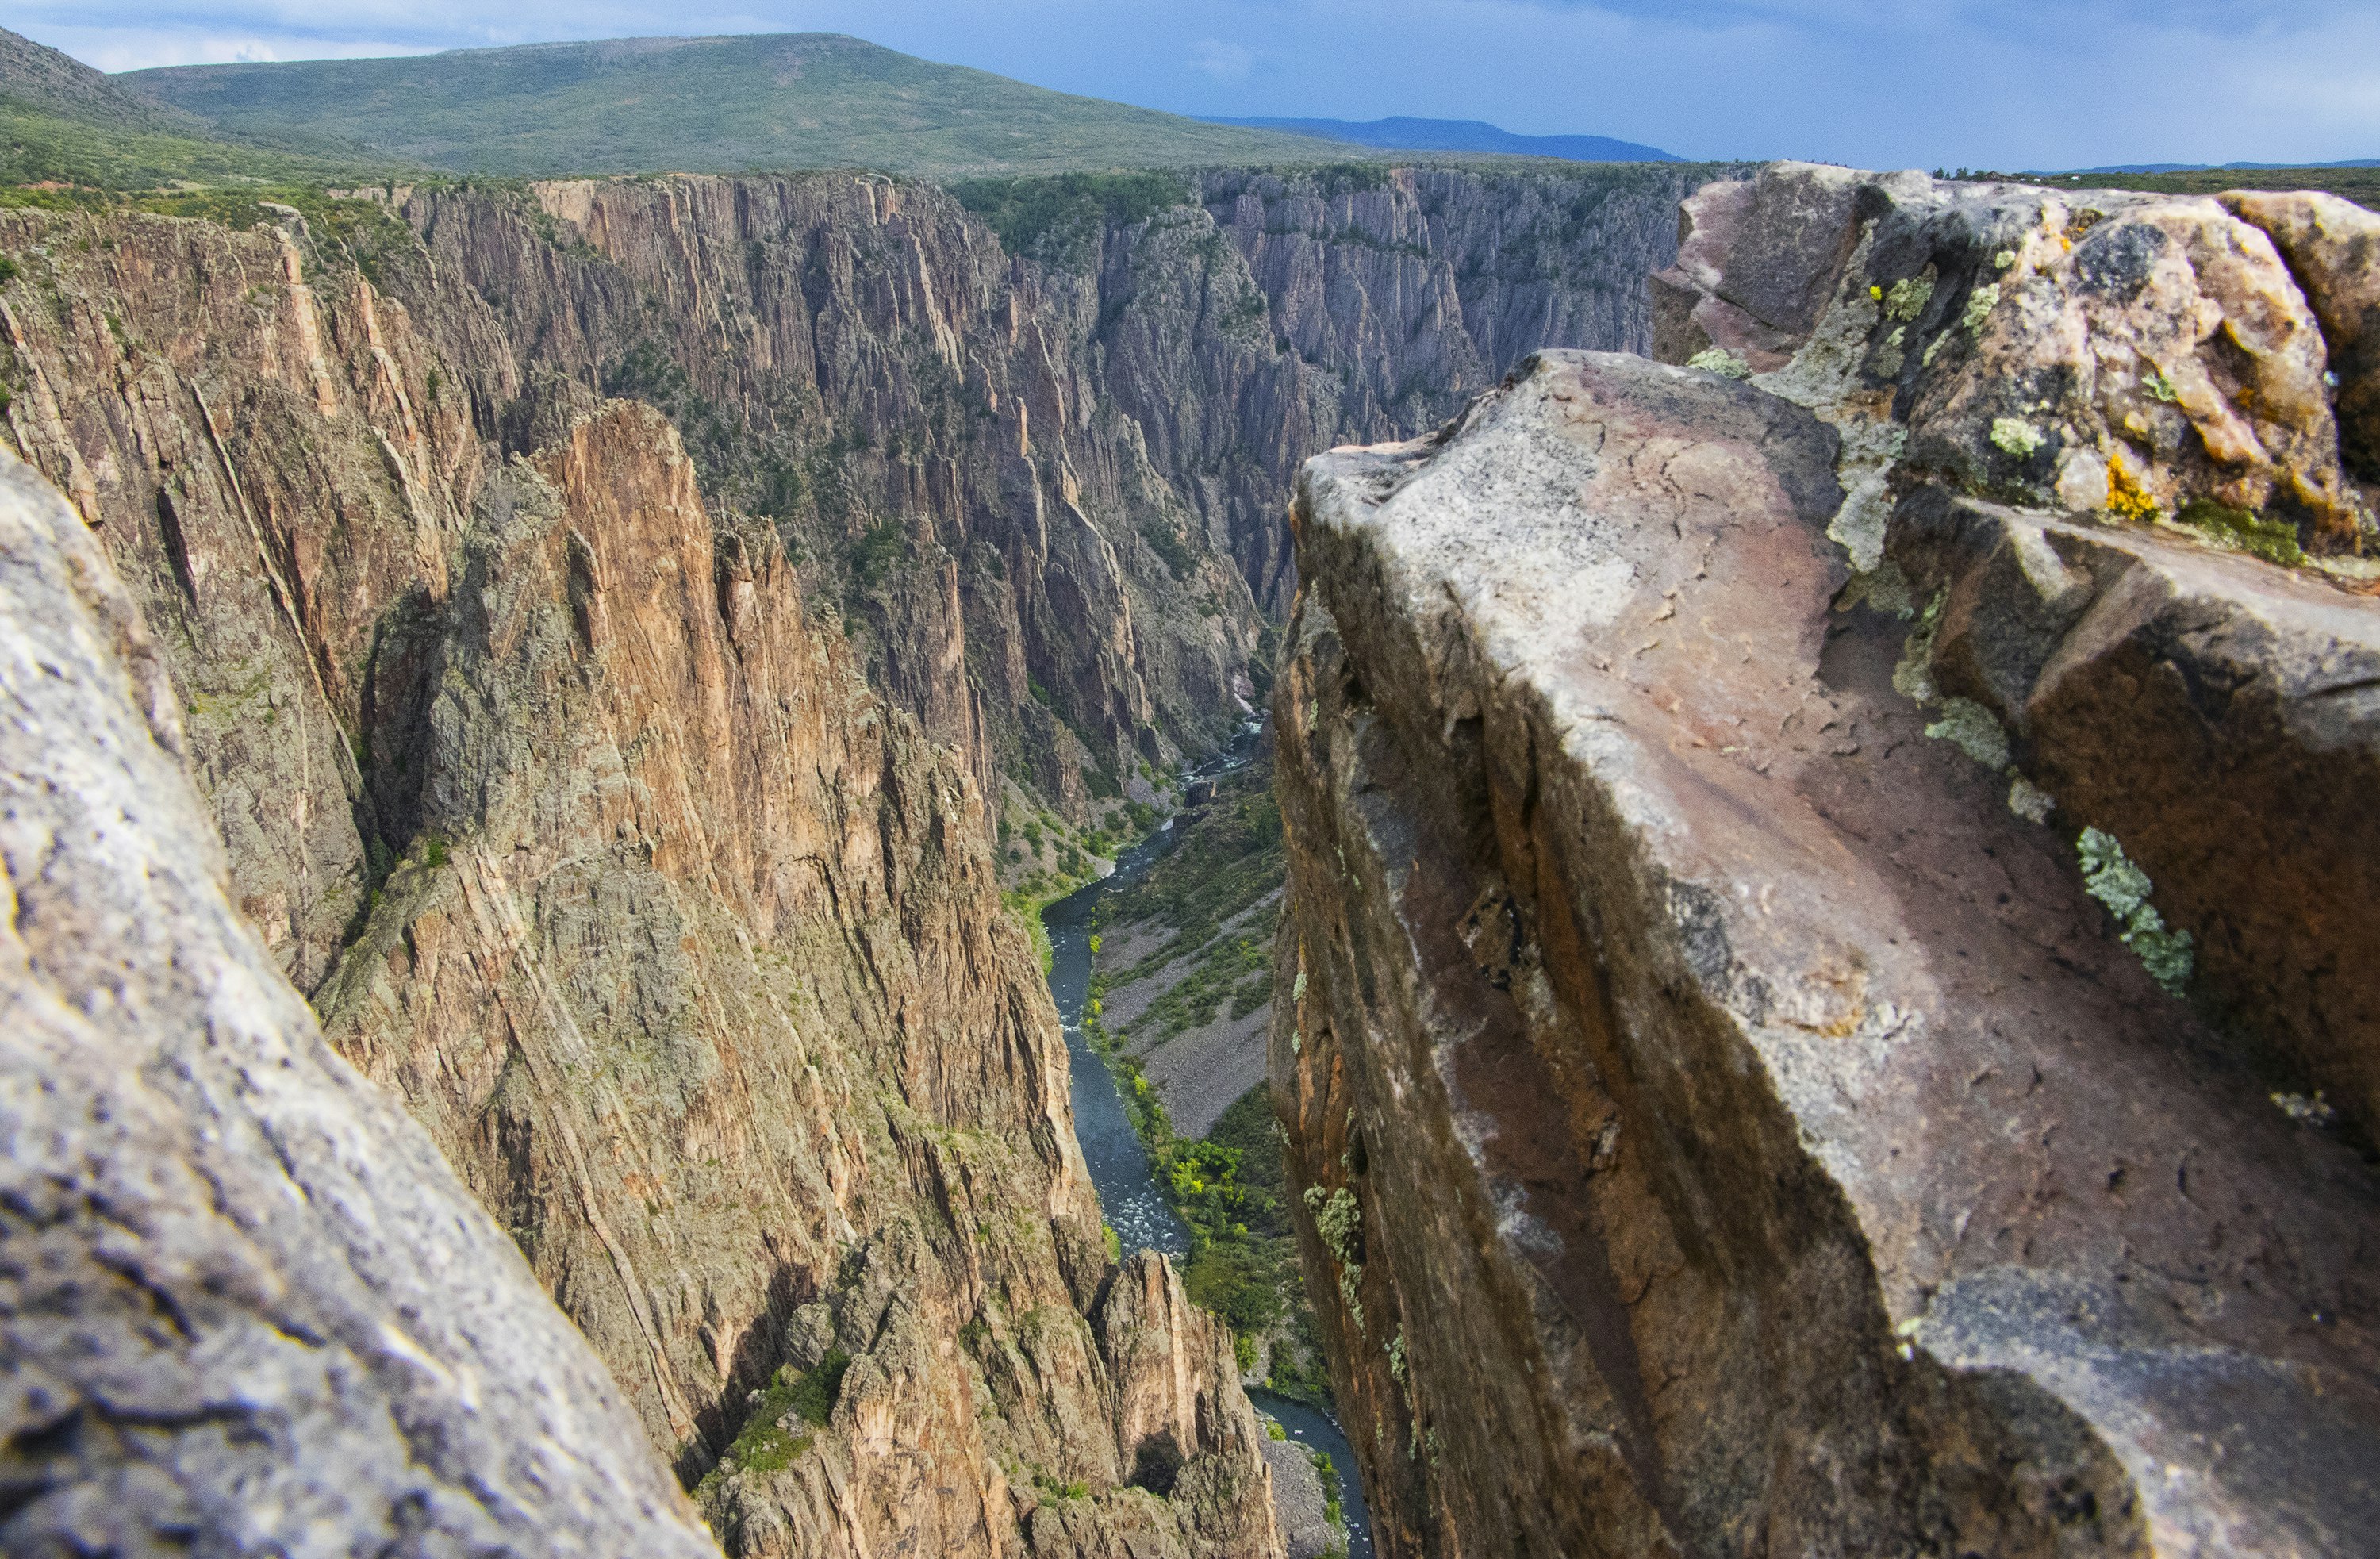 A narrow blue ribbon of water cuts through tall walls of sheer grey stippled rock in Black Canyon of the Gunnison National Park